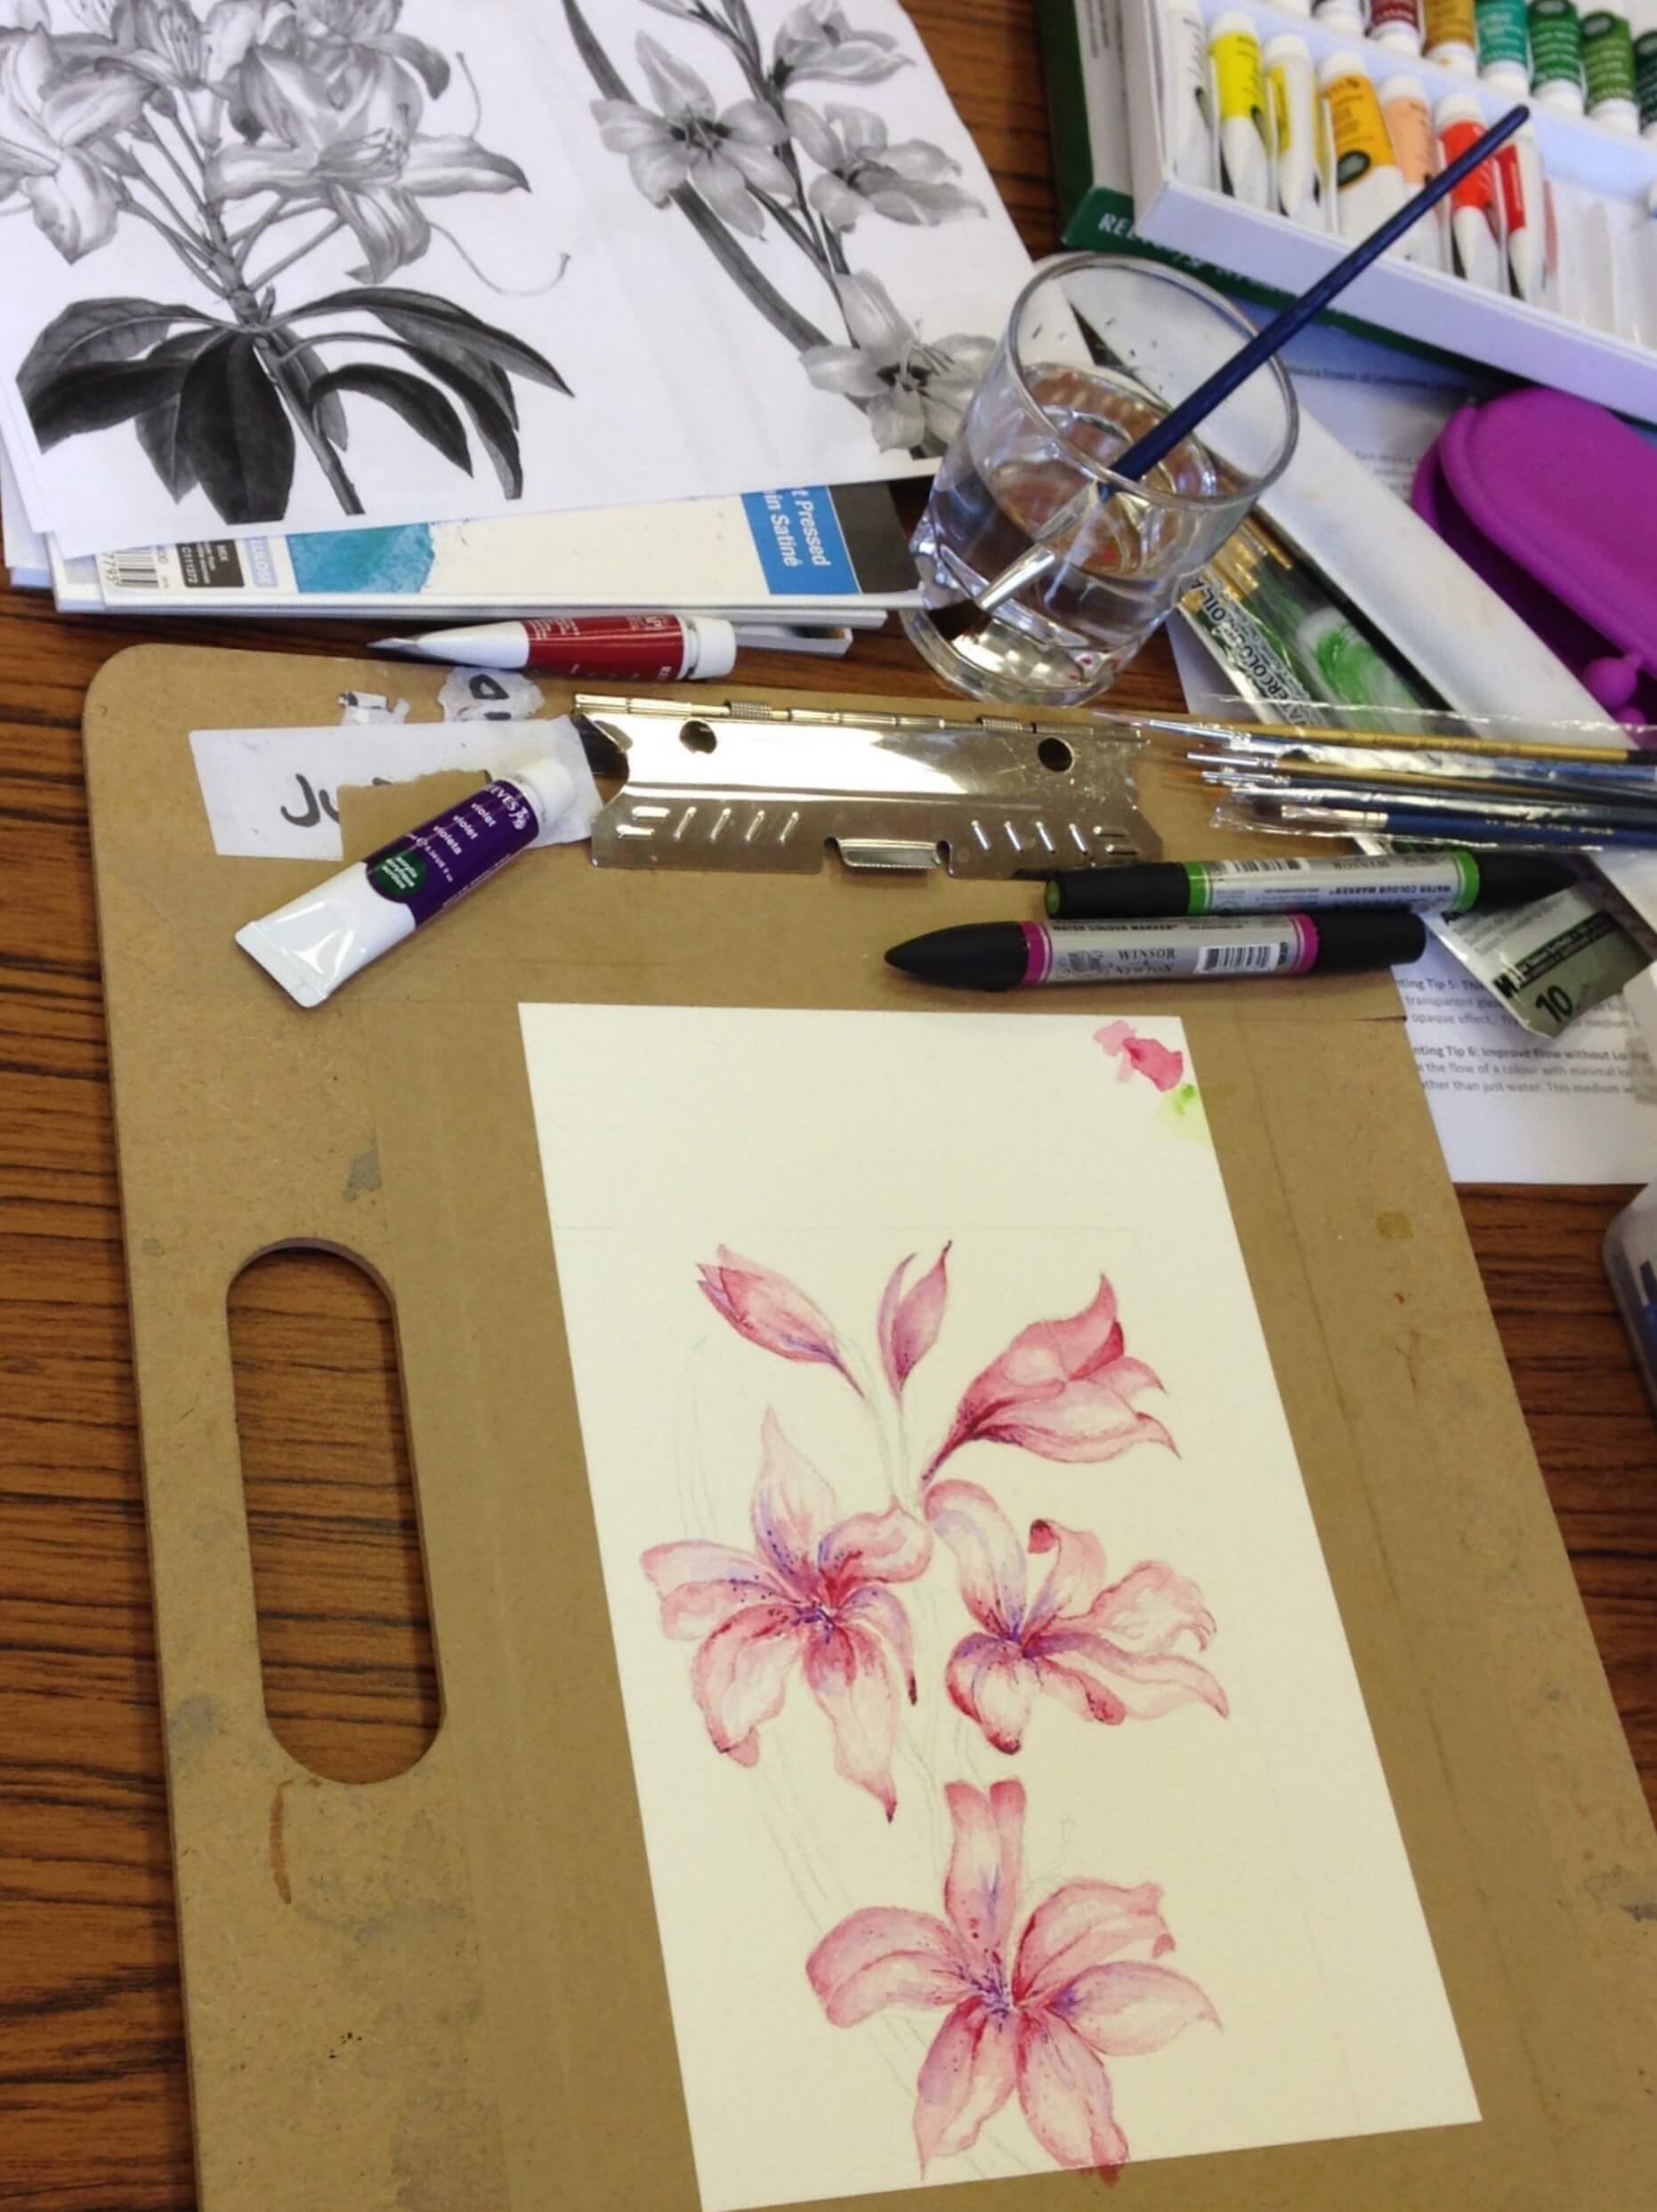 Artwork of pink flowers on a drawing board